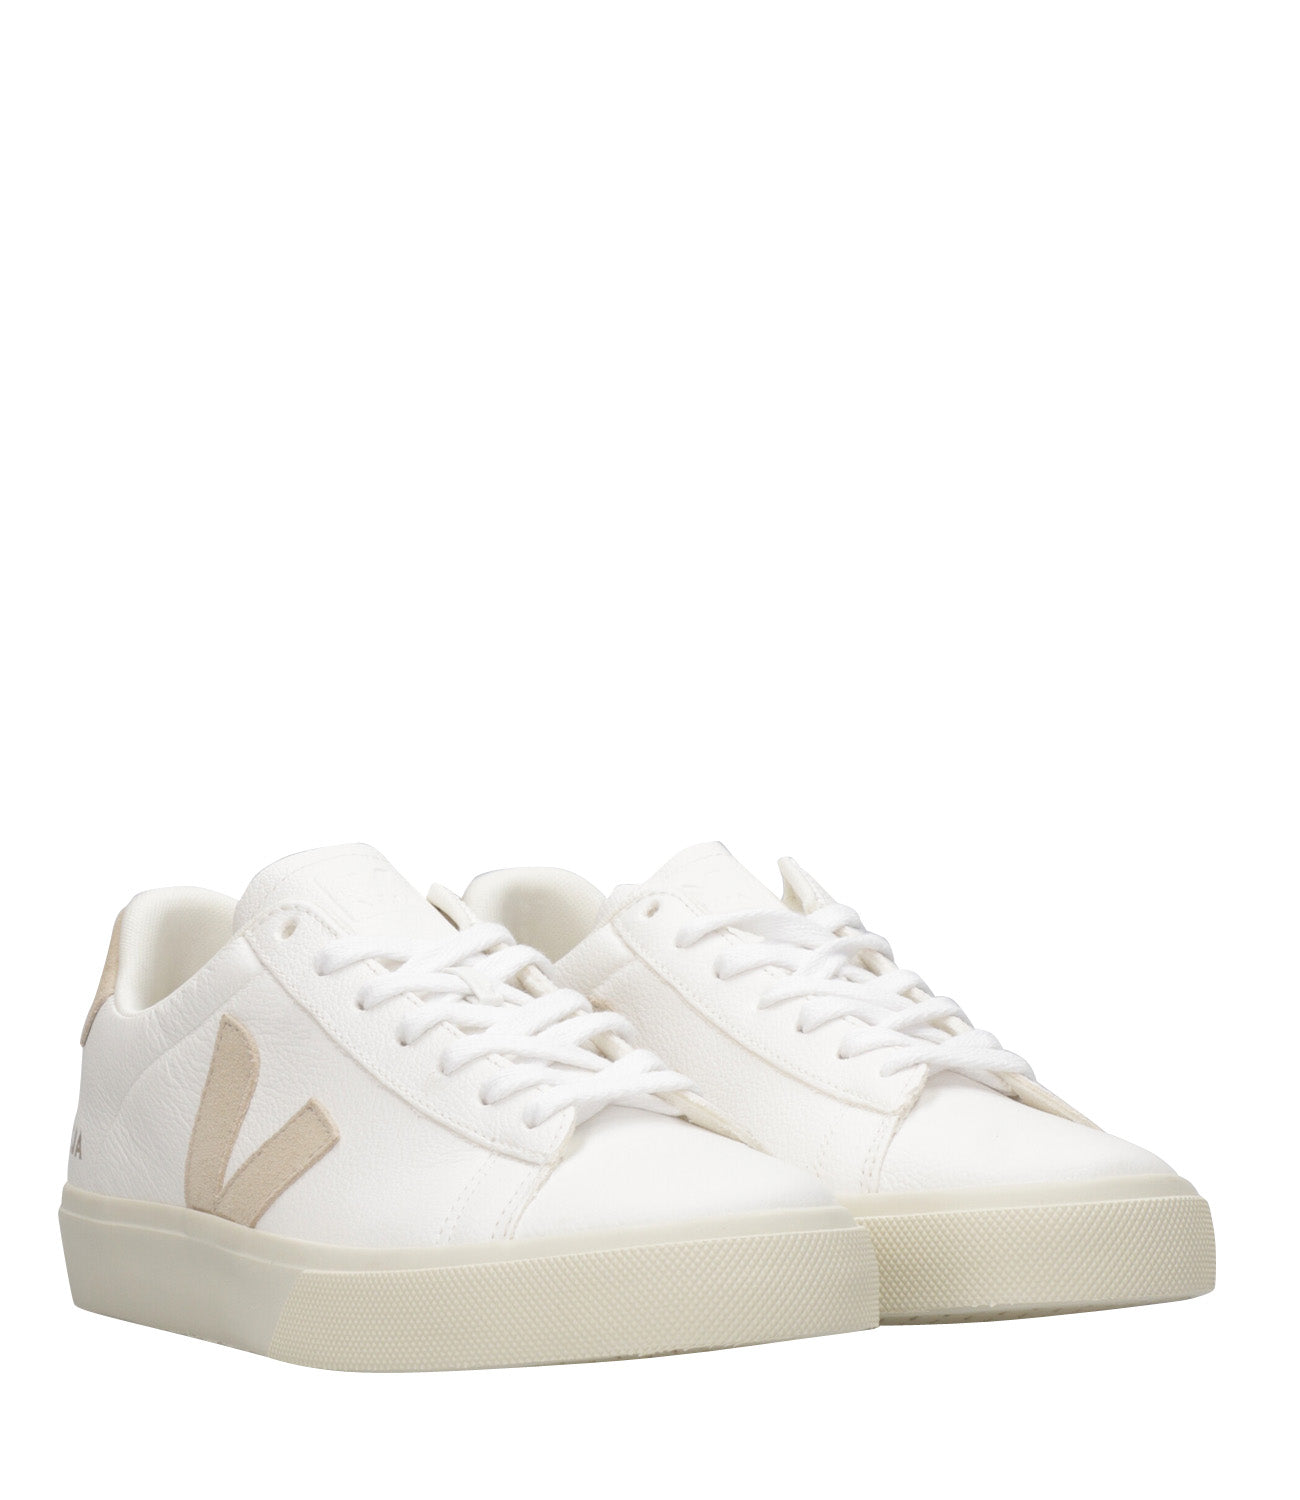 Veja | Field Sneakers Chromefree White and Almond